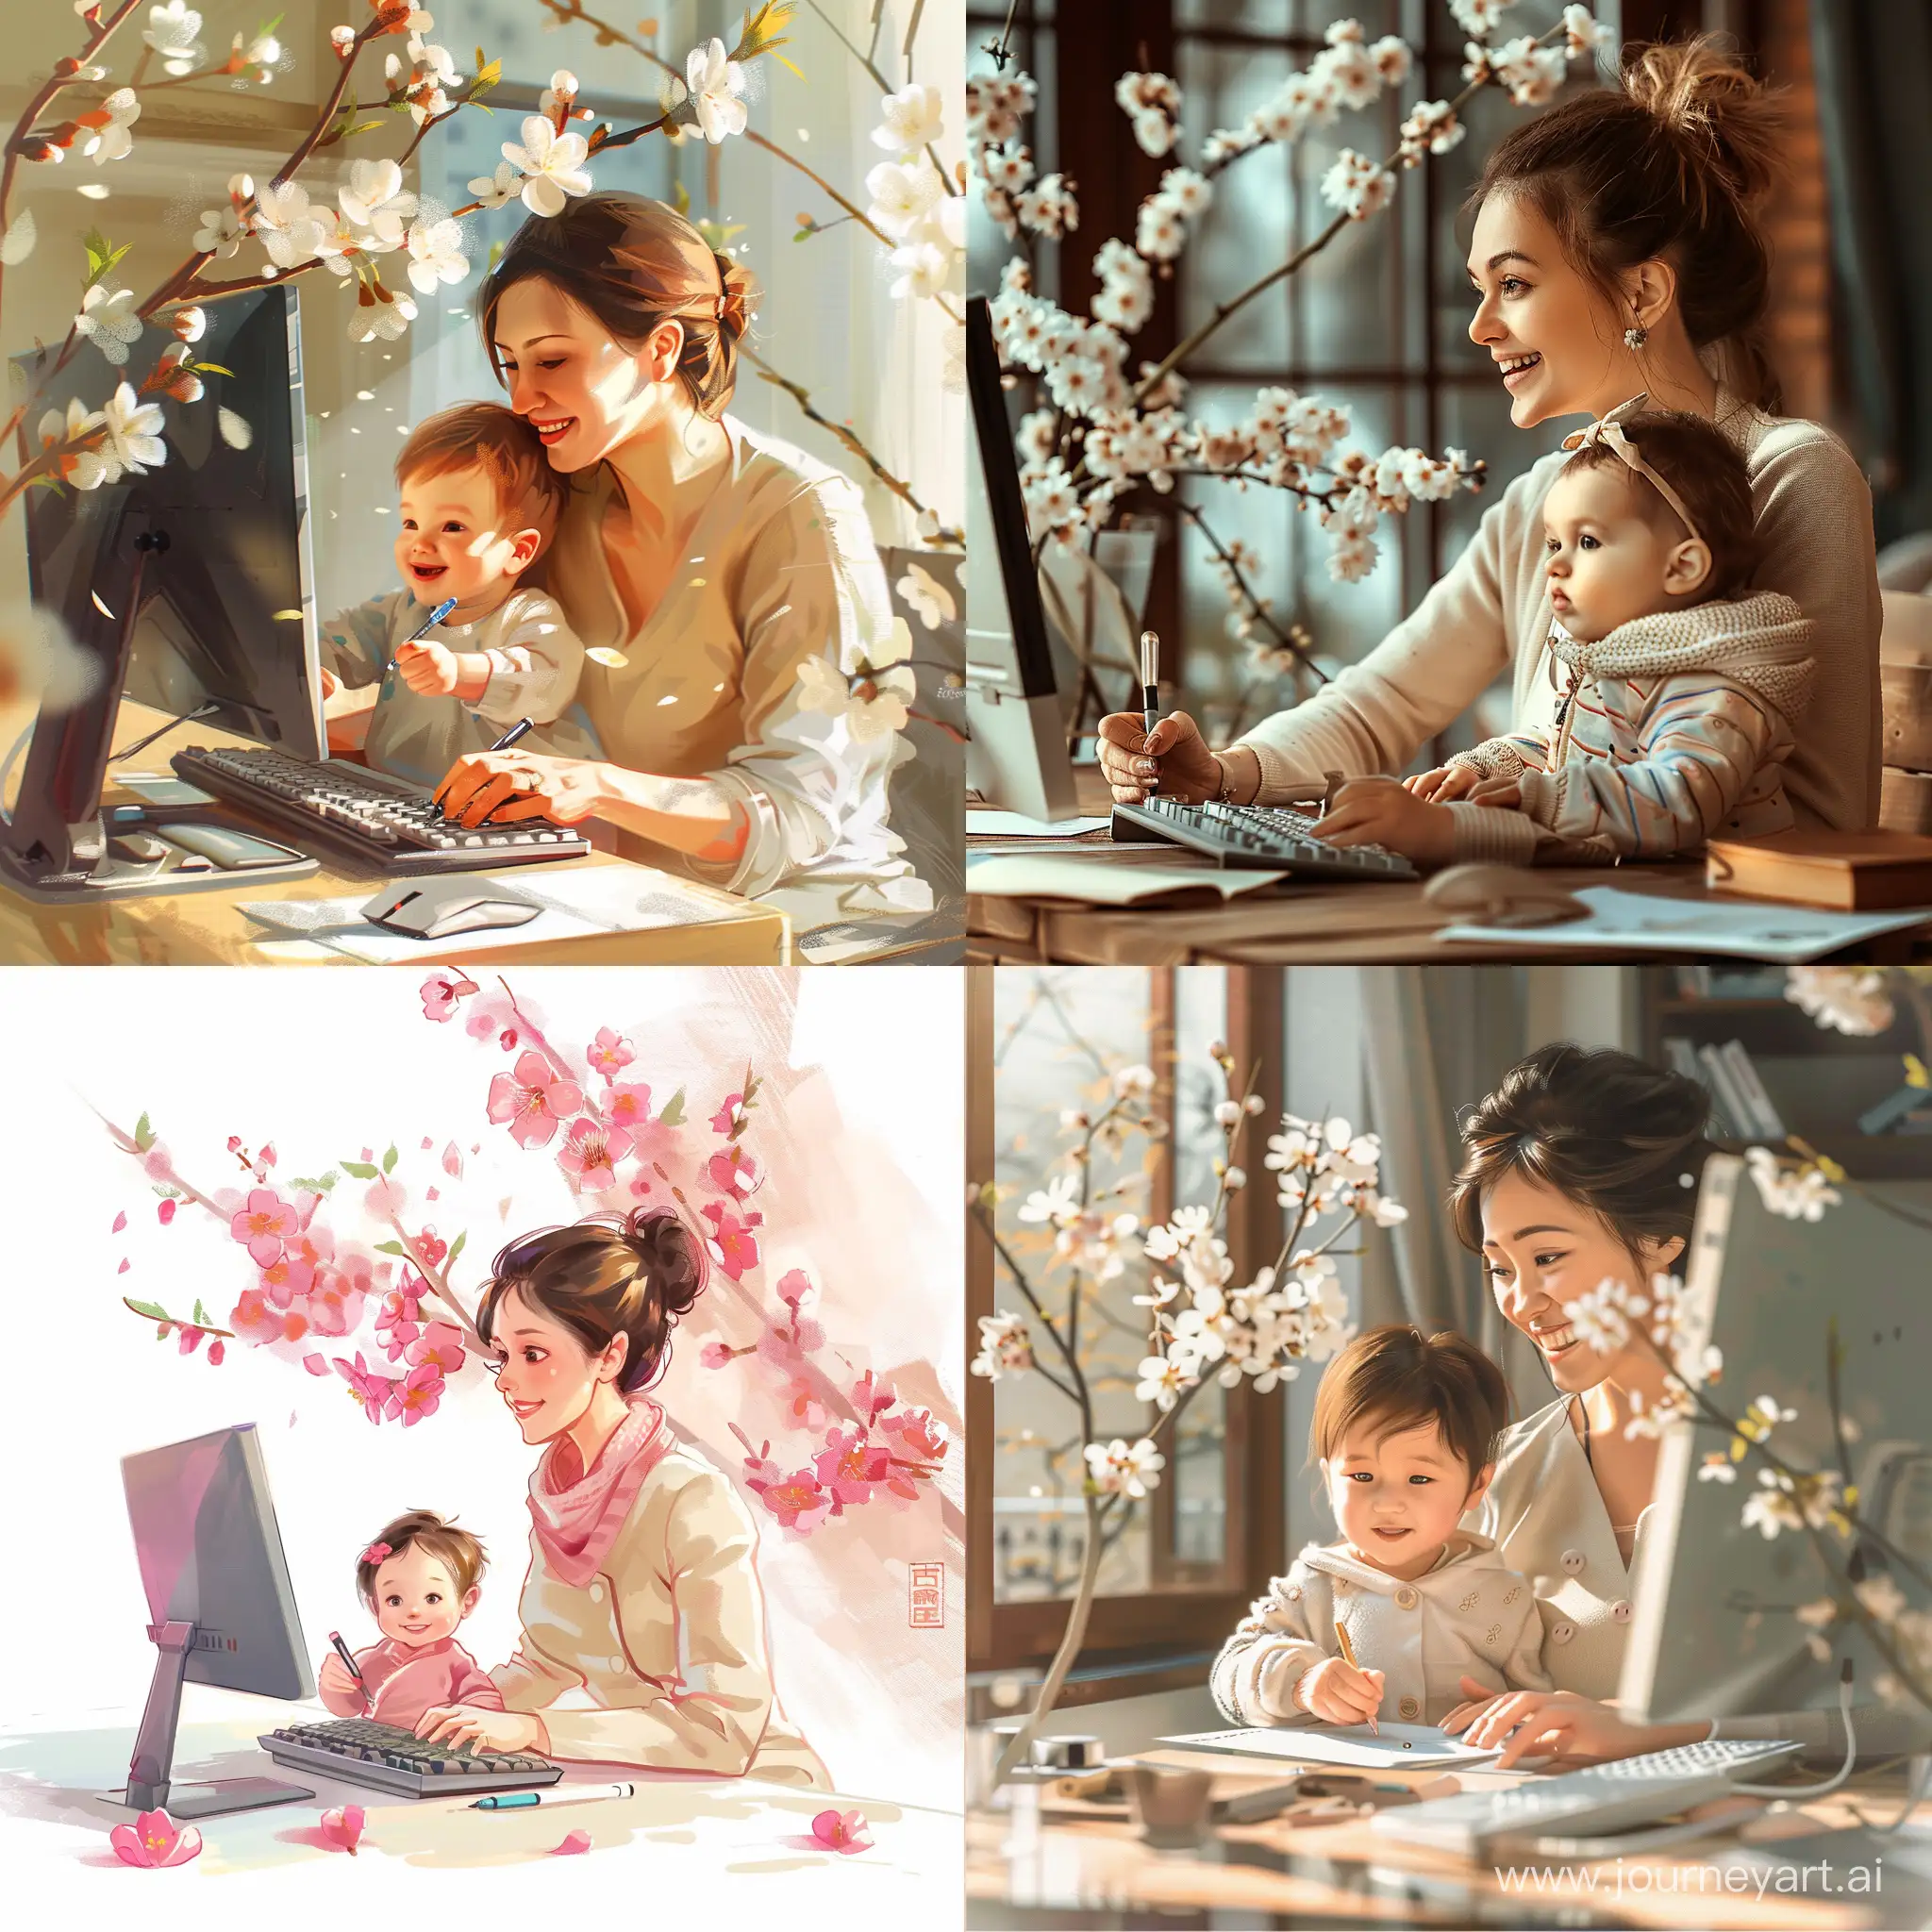 Enthusiastic-Mother-and-Child-Writing-at-Computer-with-Bright-Blossoms